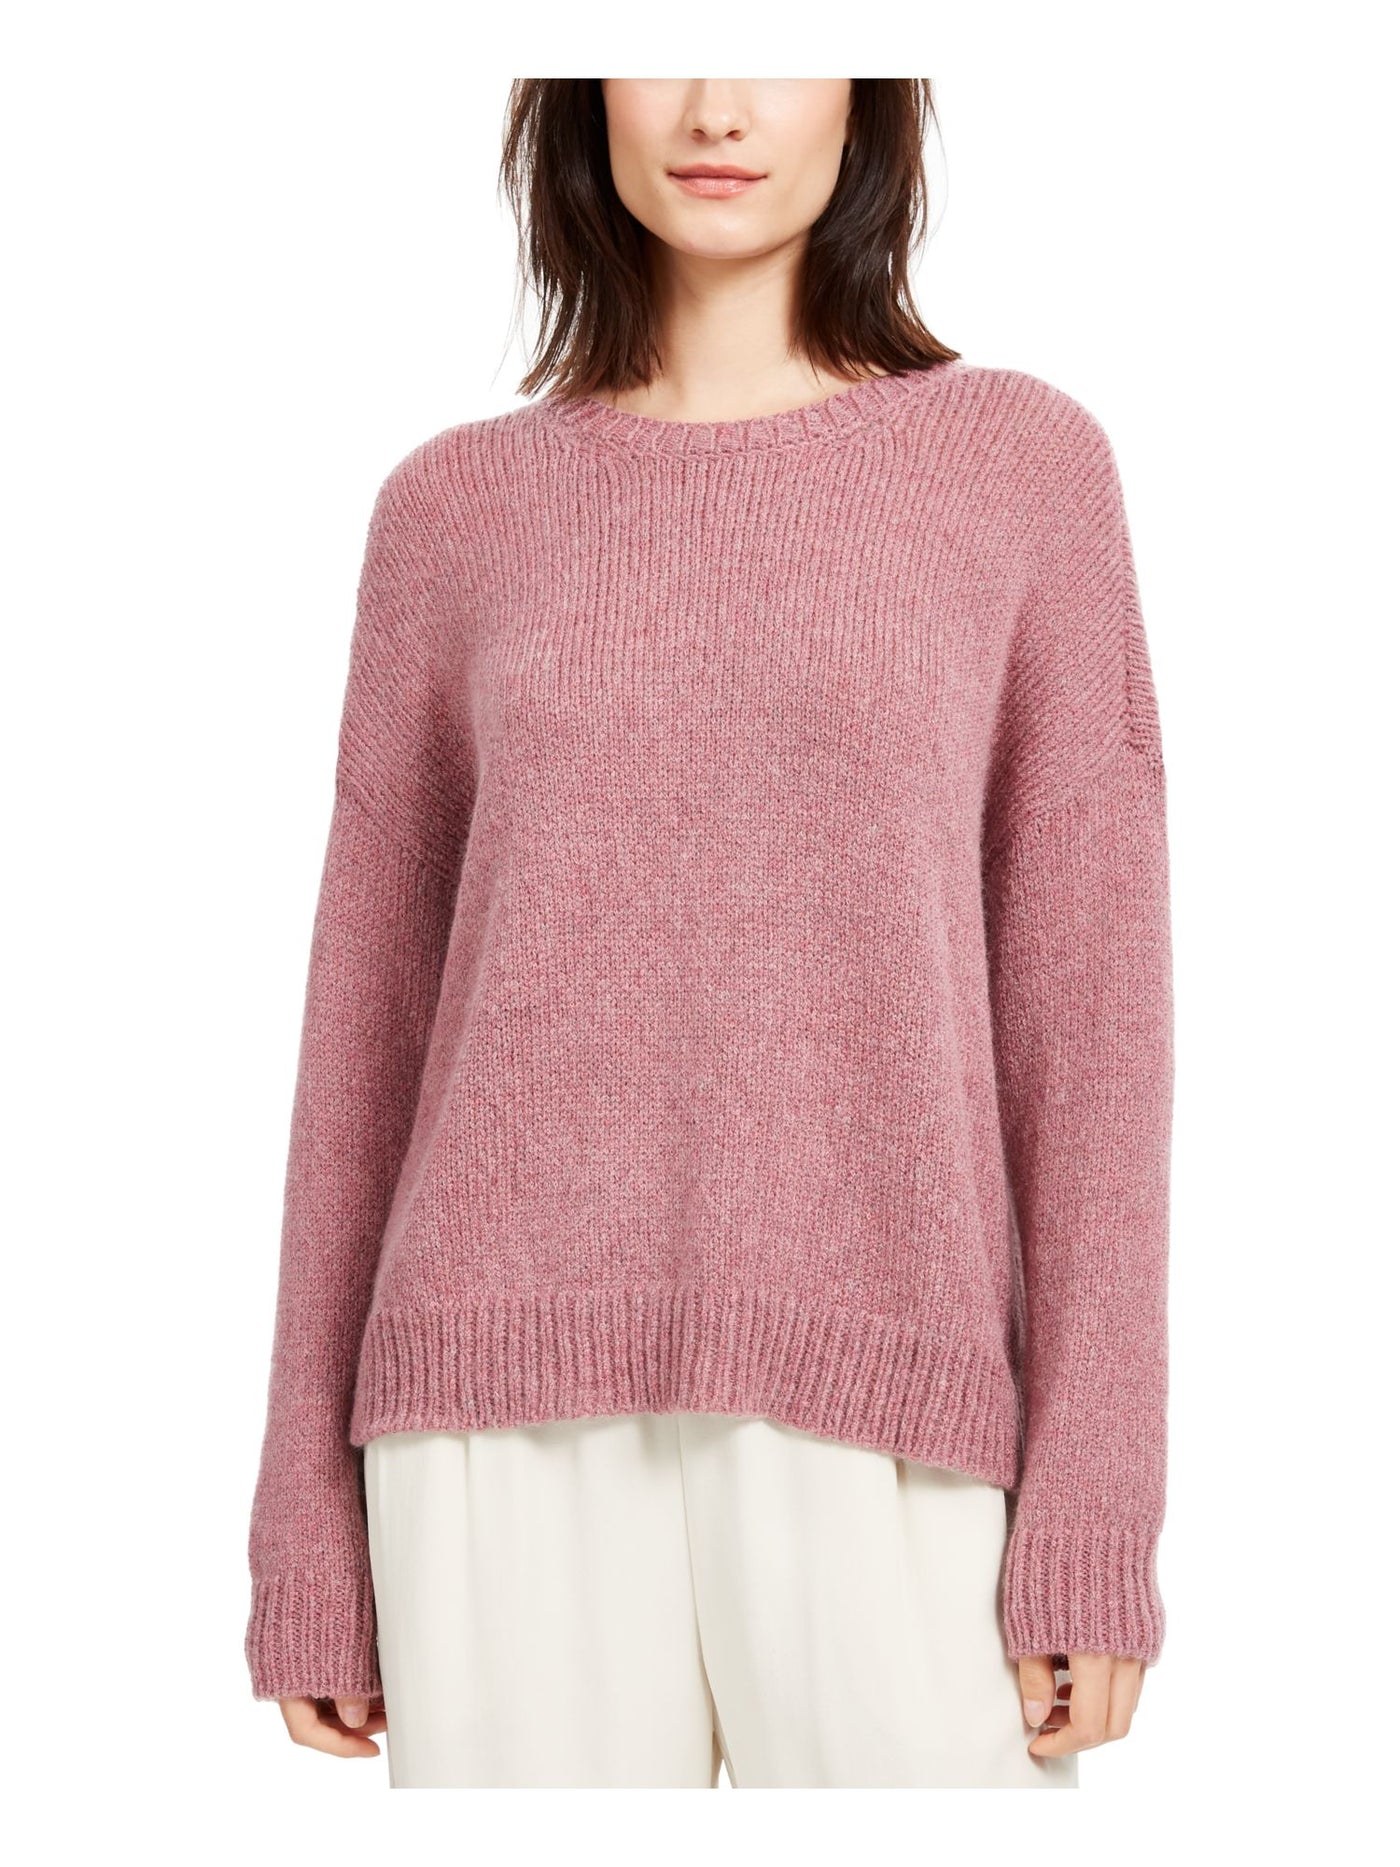 EILEEN FISHER Womens Pink Ribbed Long Sleeve Jewel Neck Sweater L